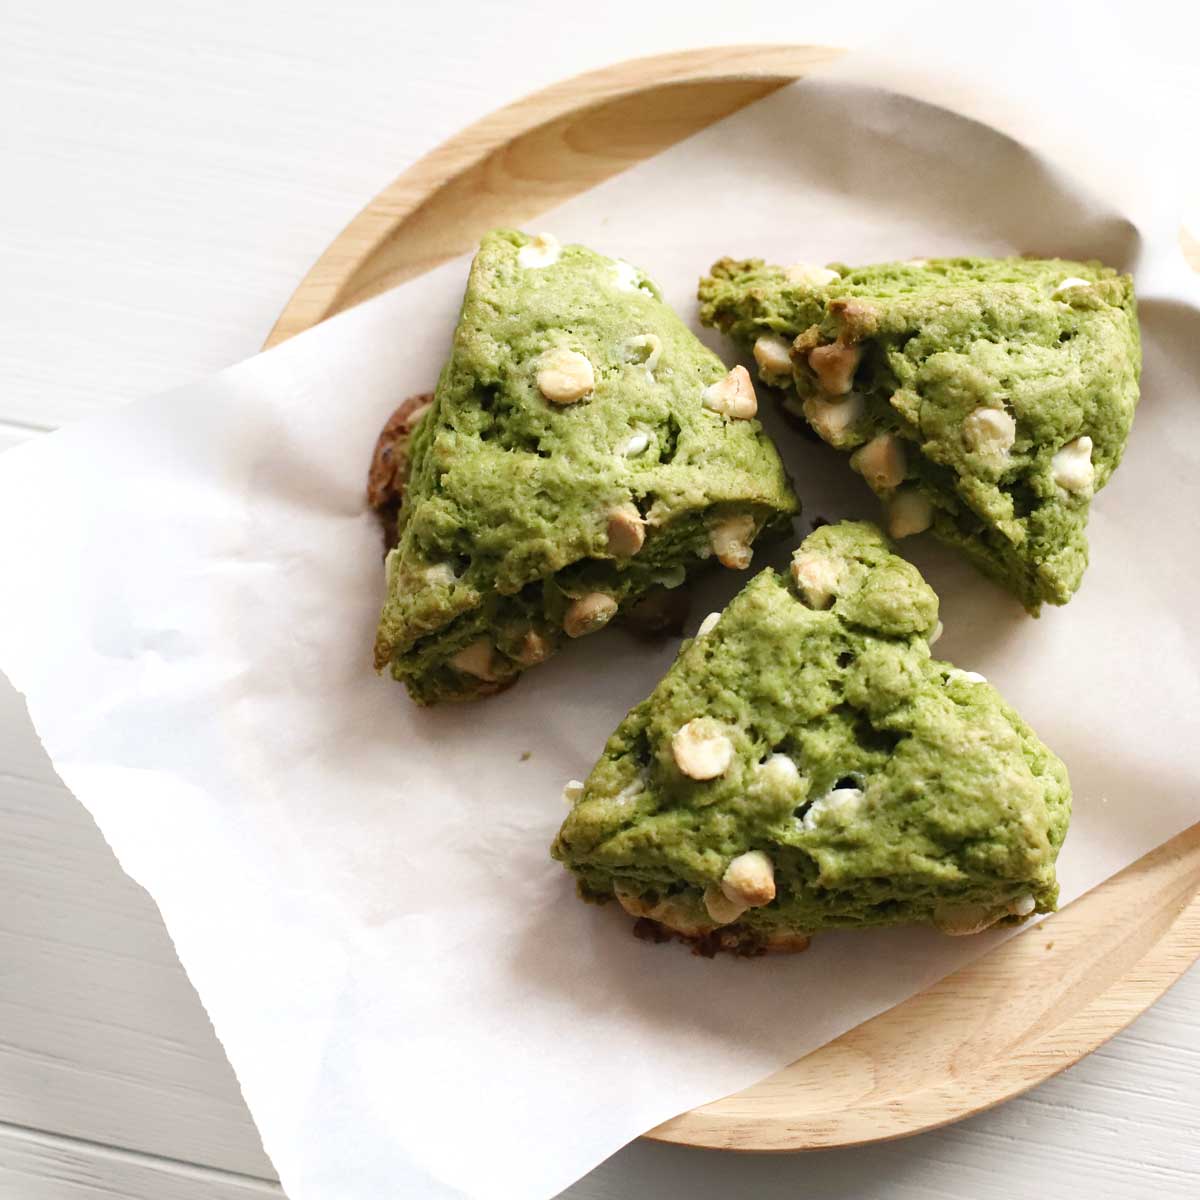 Homemade Matcha Scones with White Chocolate Chips (No Butter Required!) - Vegan Scones with Cornstarch